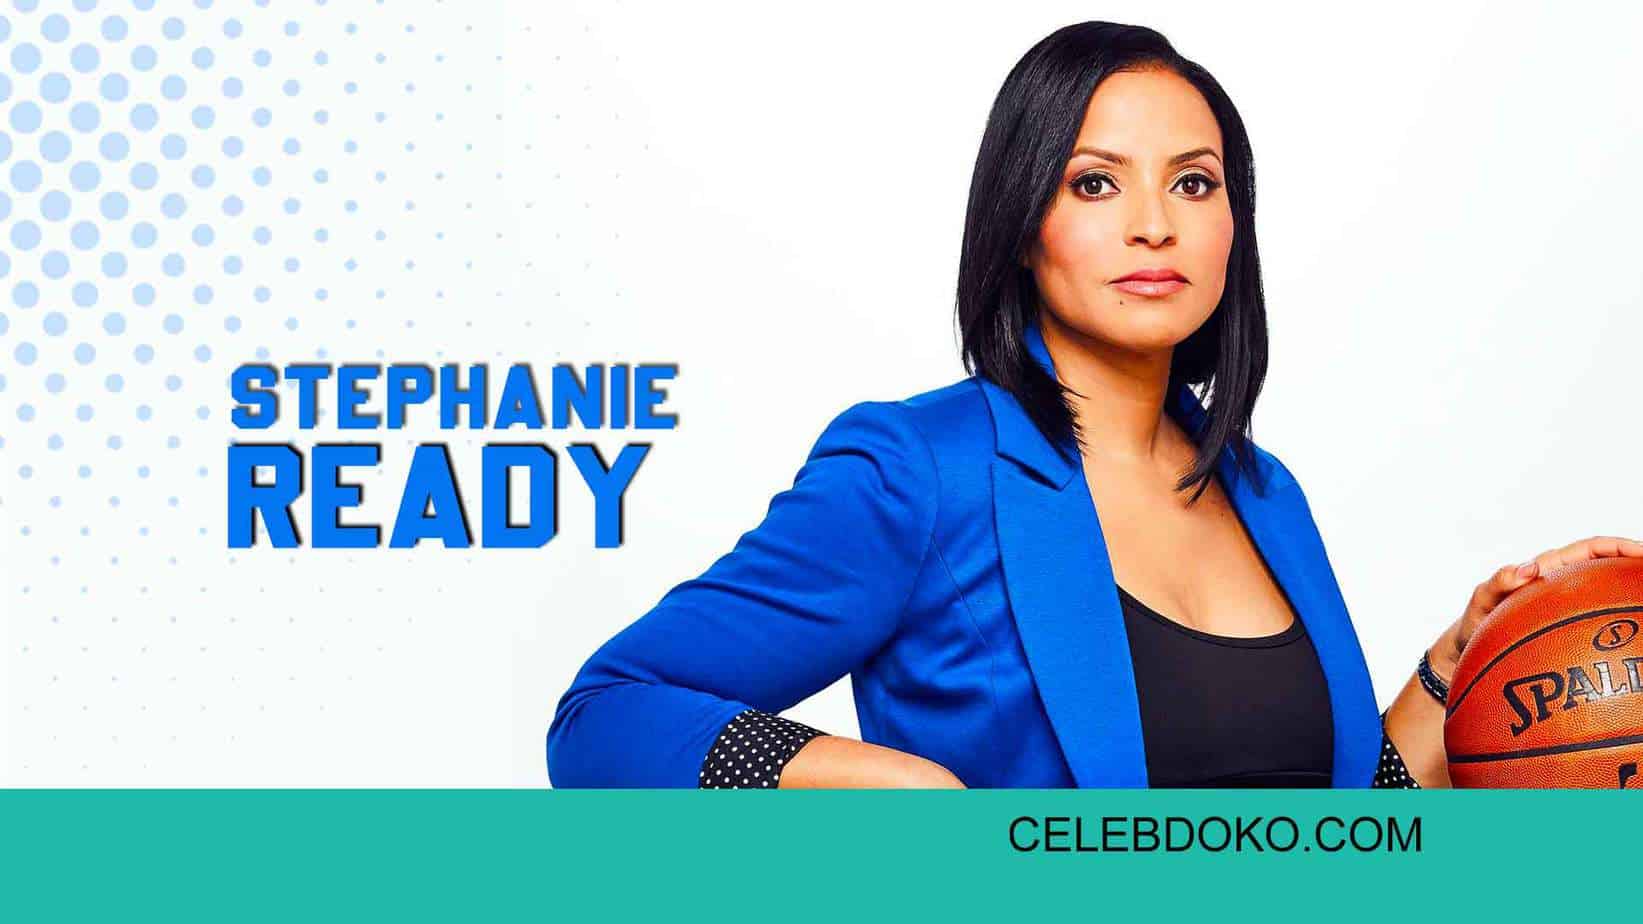 Stephanie Ready, an American Broadcaster and a former coach, has set histor...